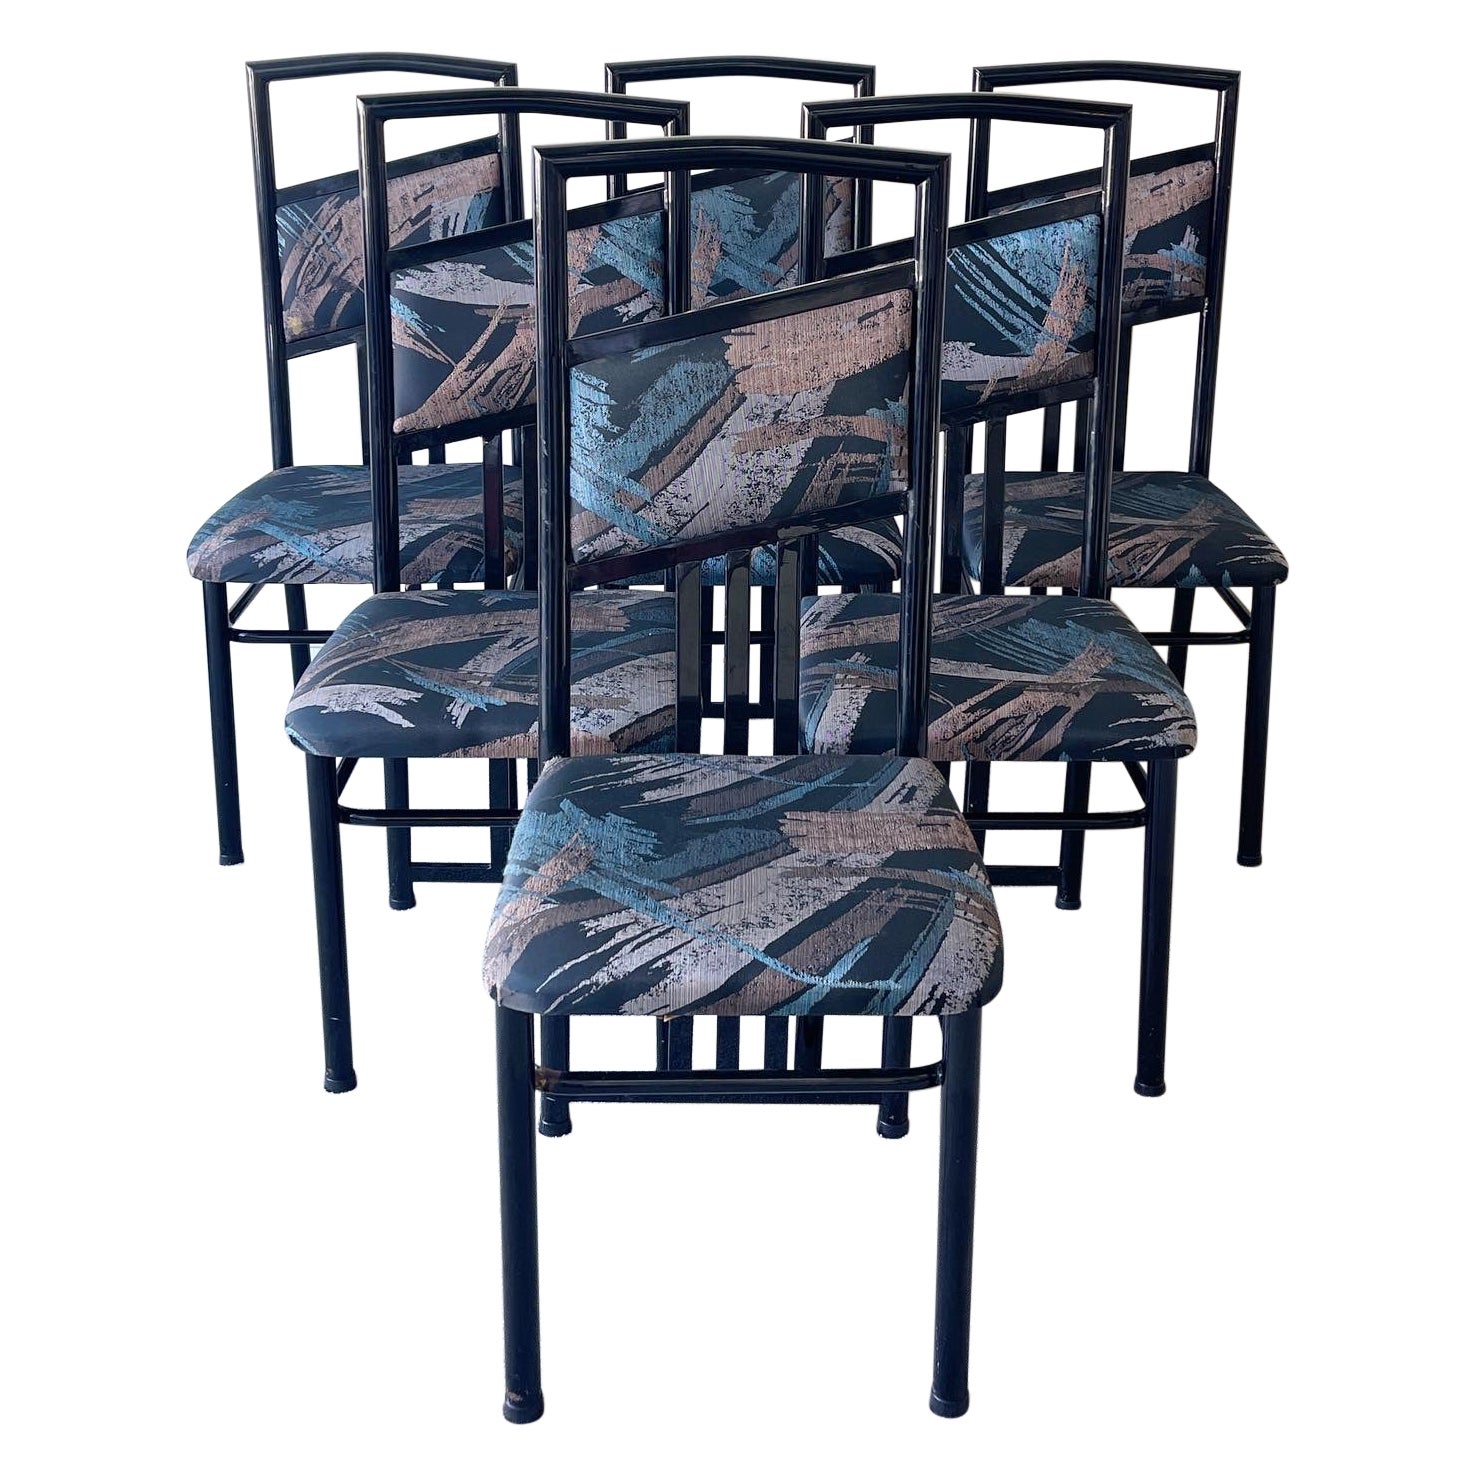 Set of 6 Vintage Black Lacquered Metal Dining Chairs, 1980